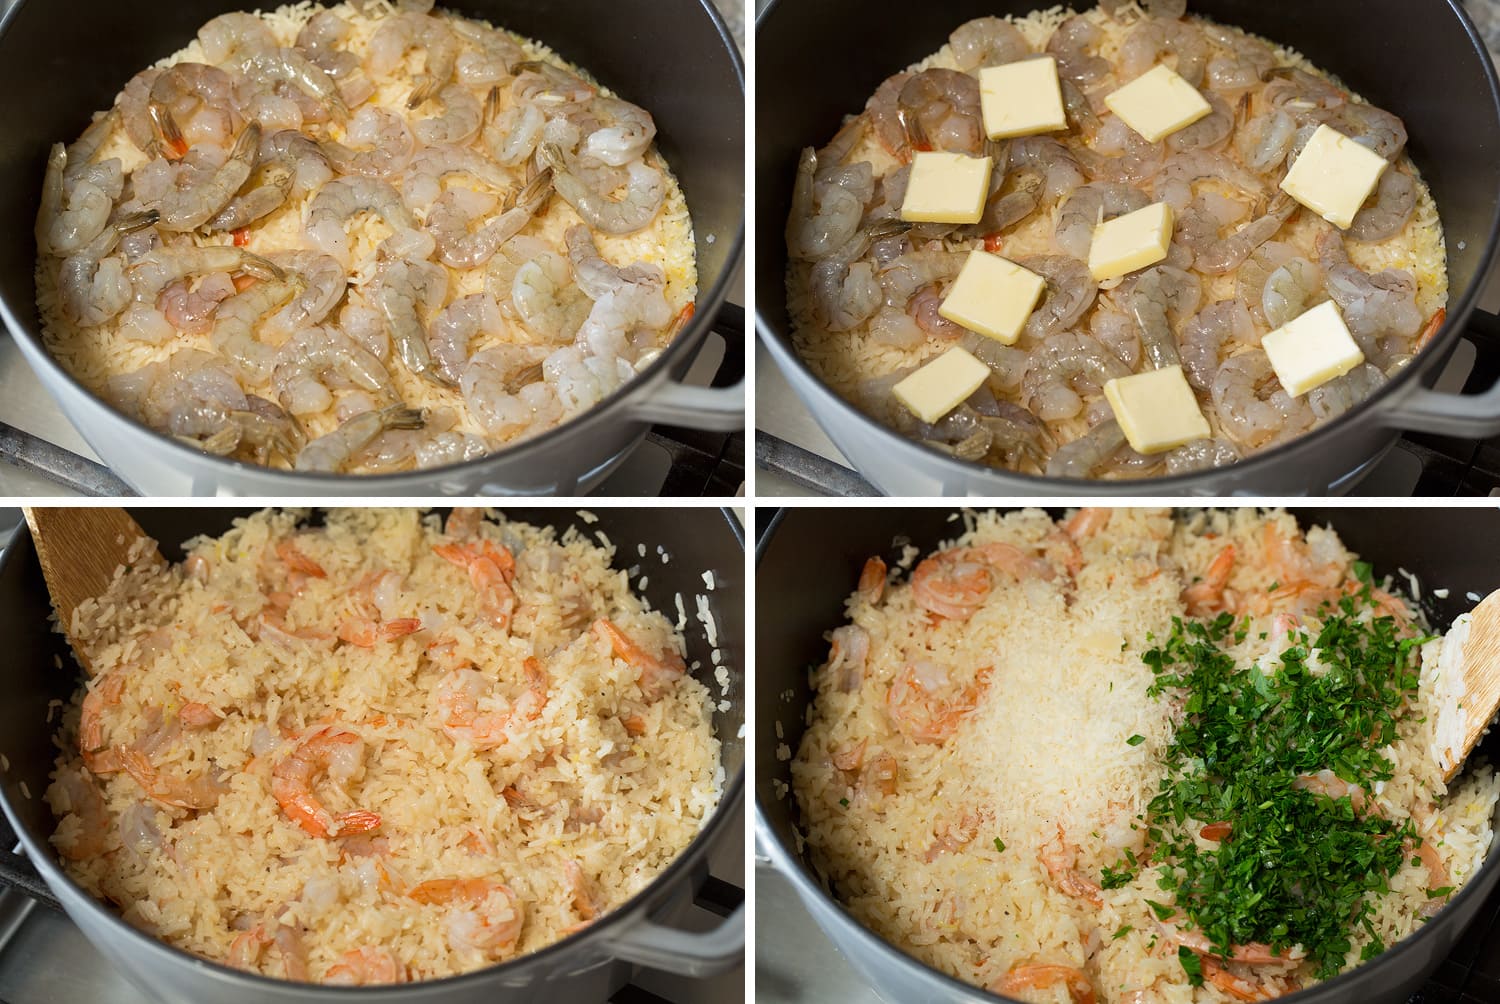 Steps for cooking shrimp with the rice.